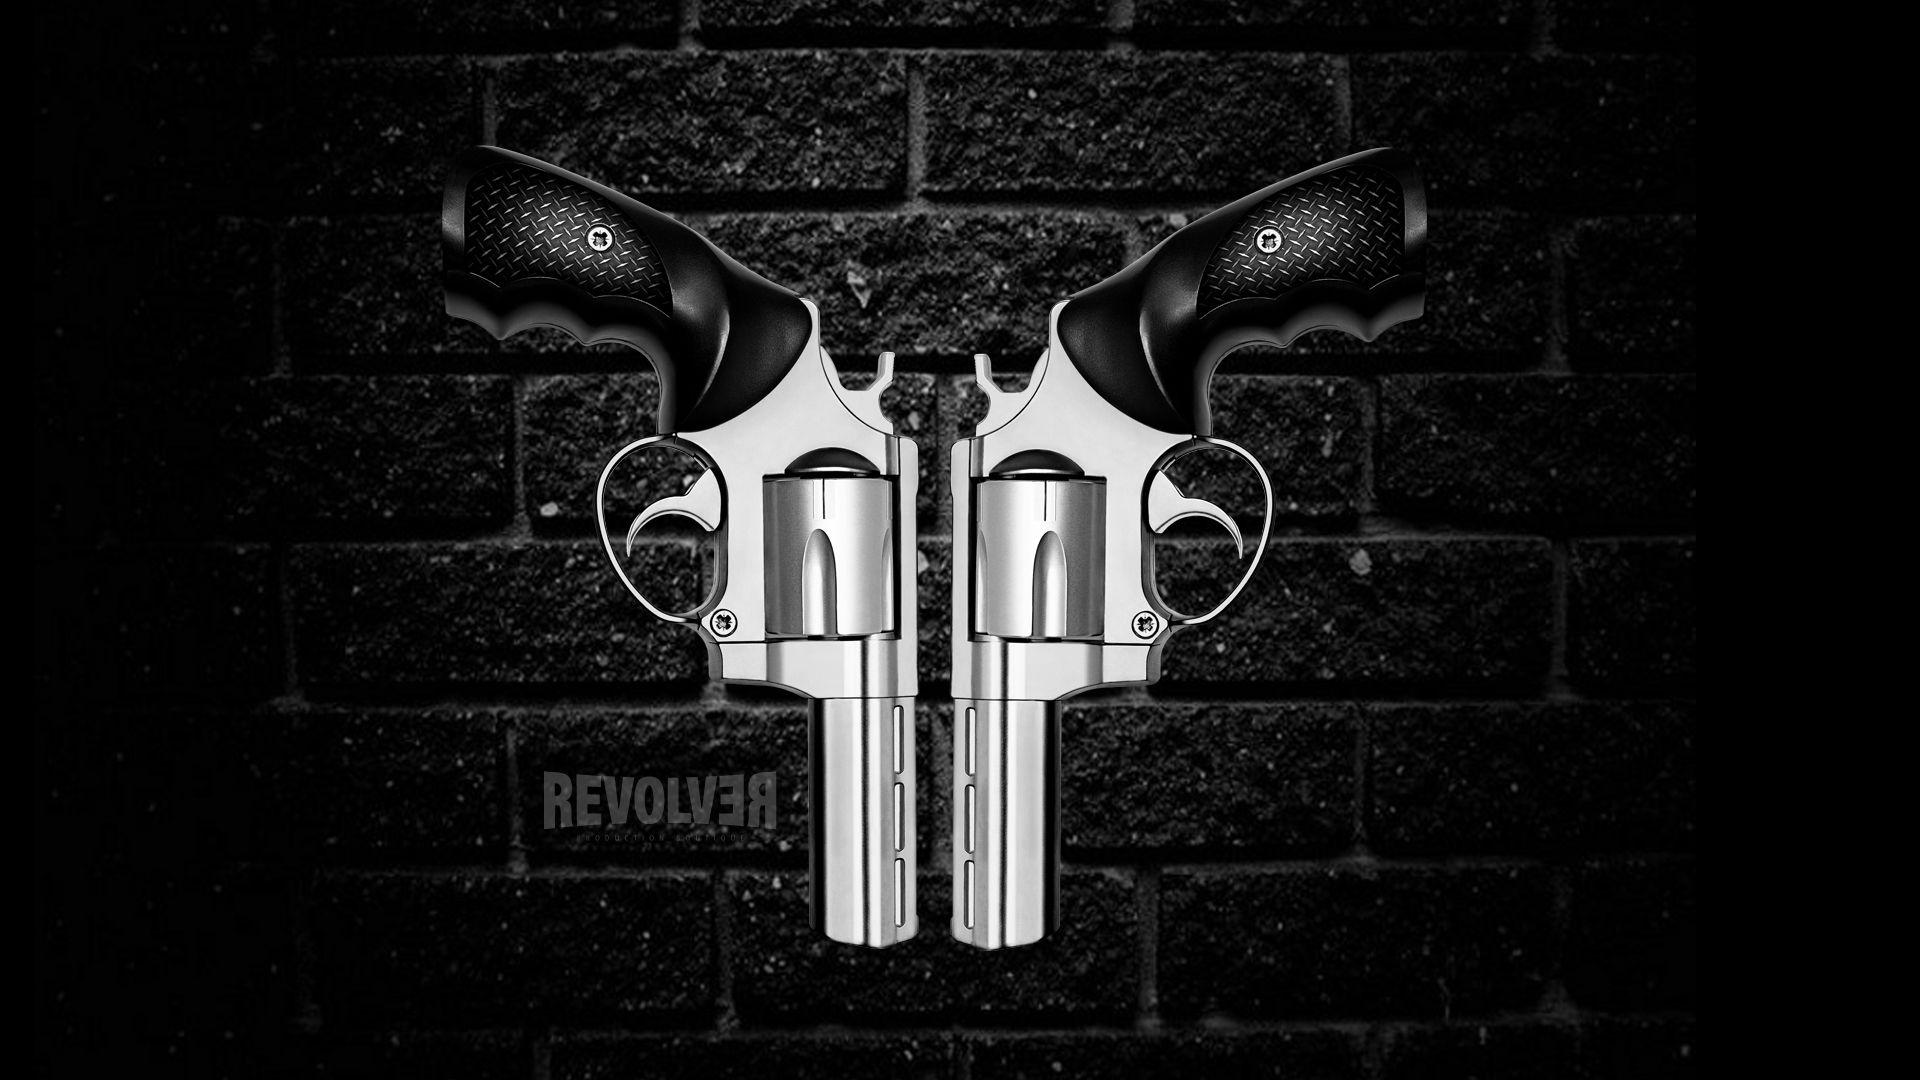 Great Collection: Revolver Wallpaper, 100% Quality HD Revolver